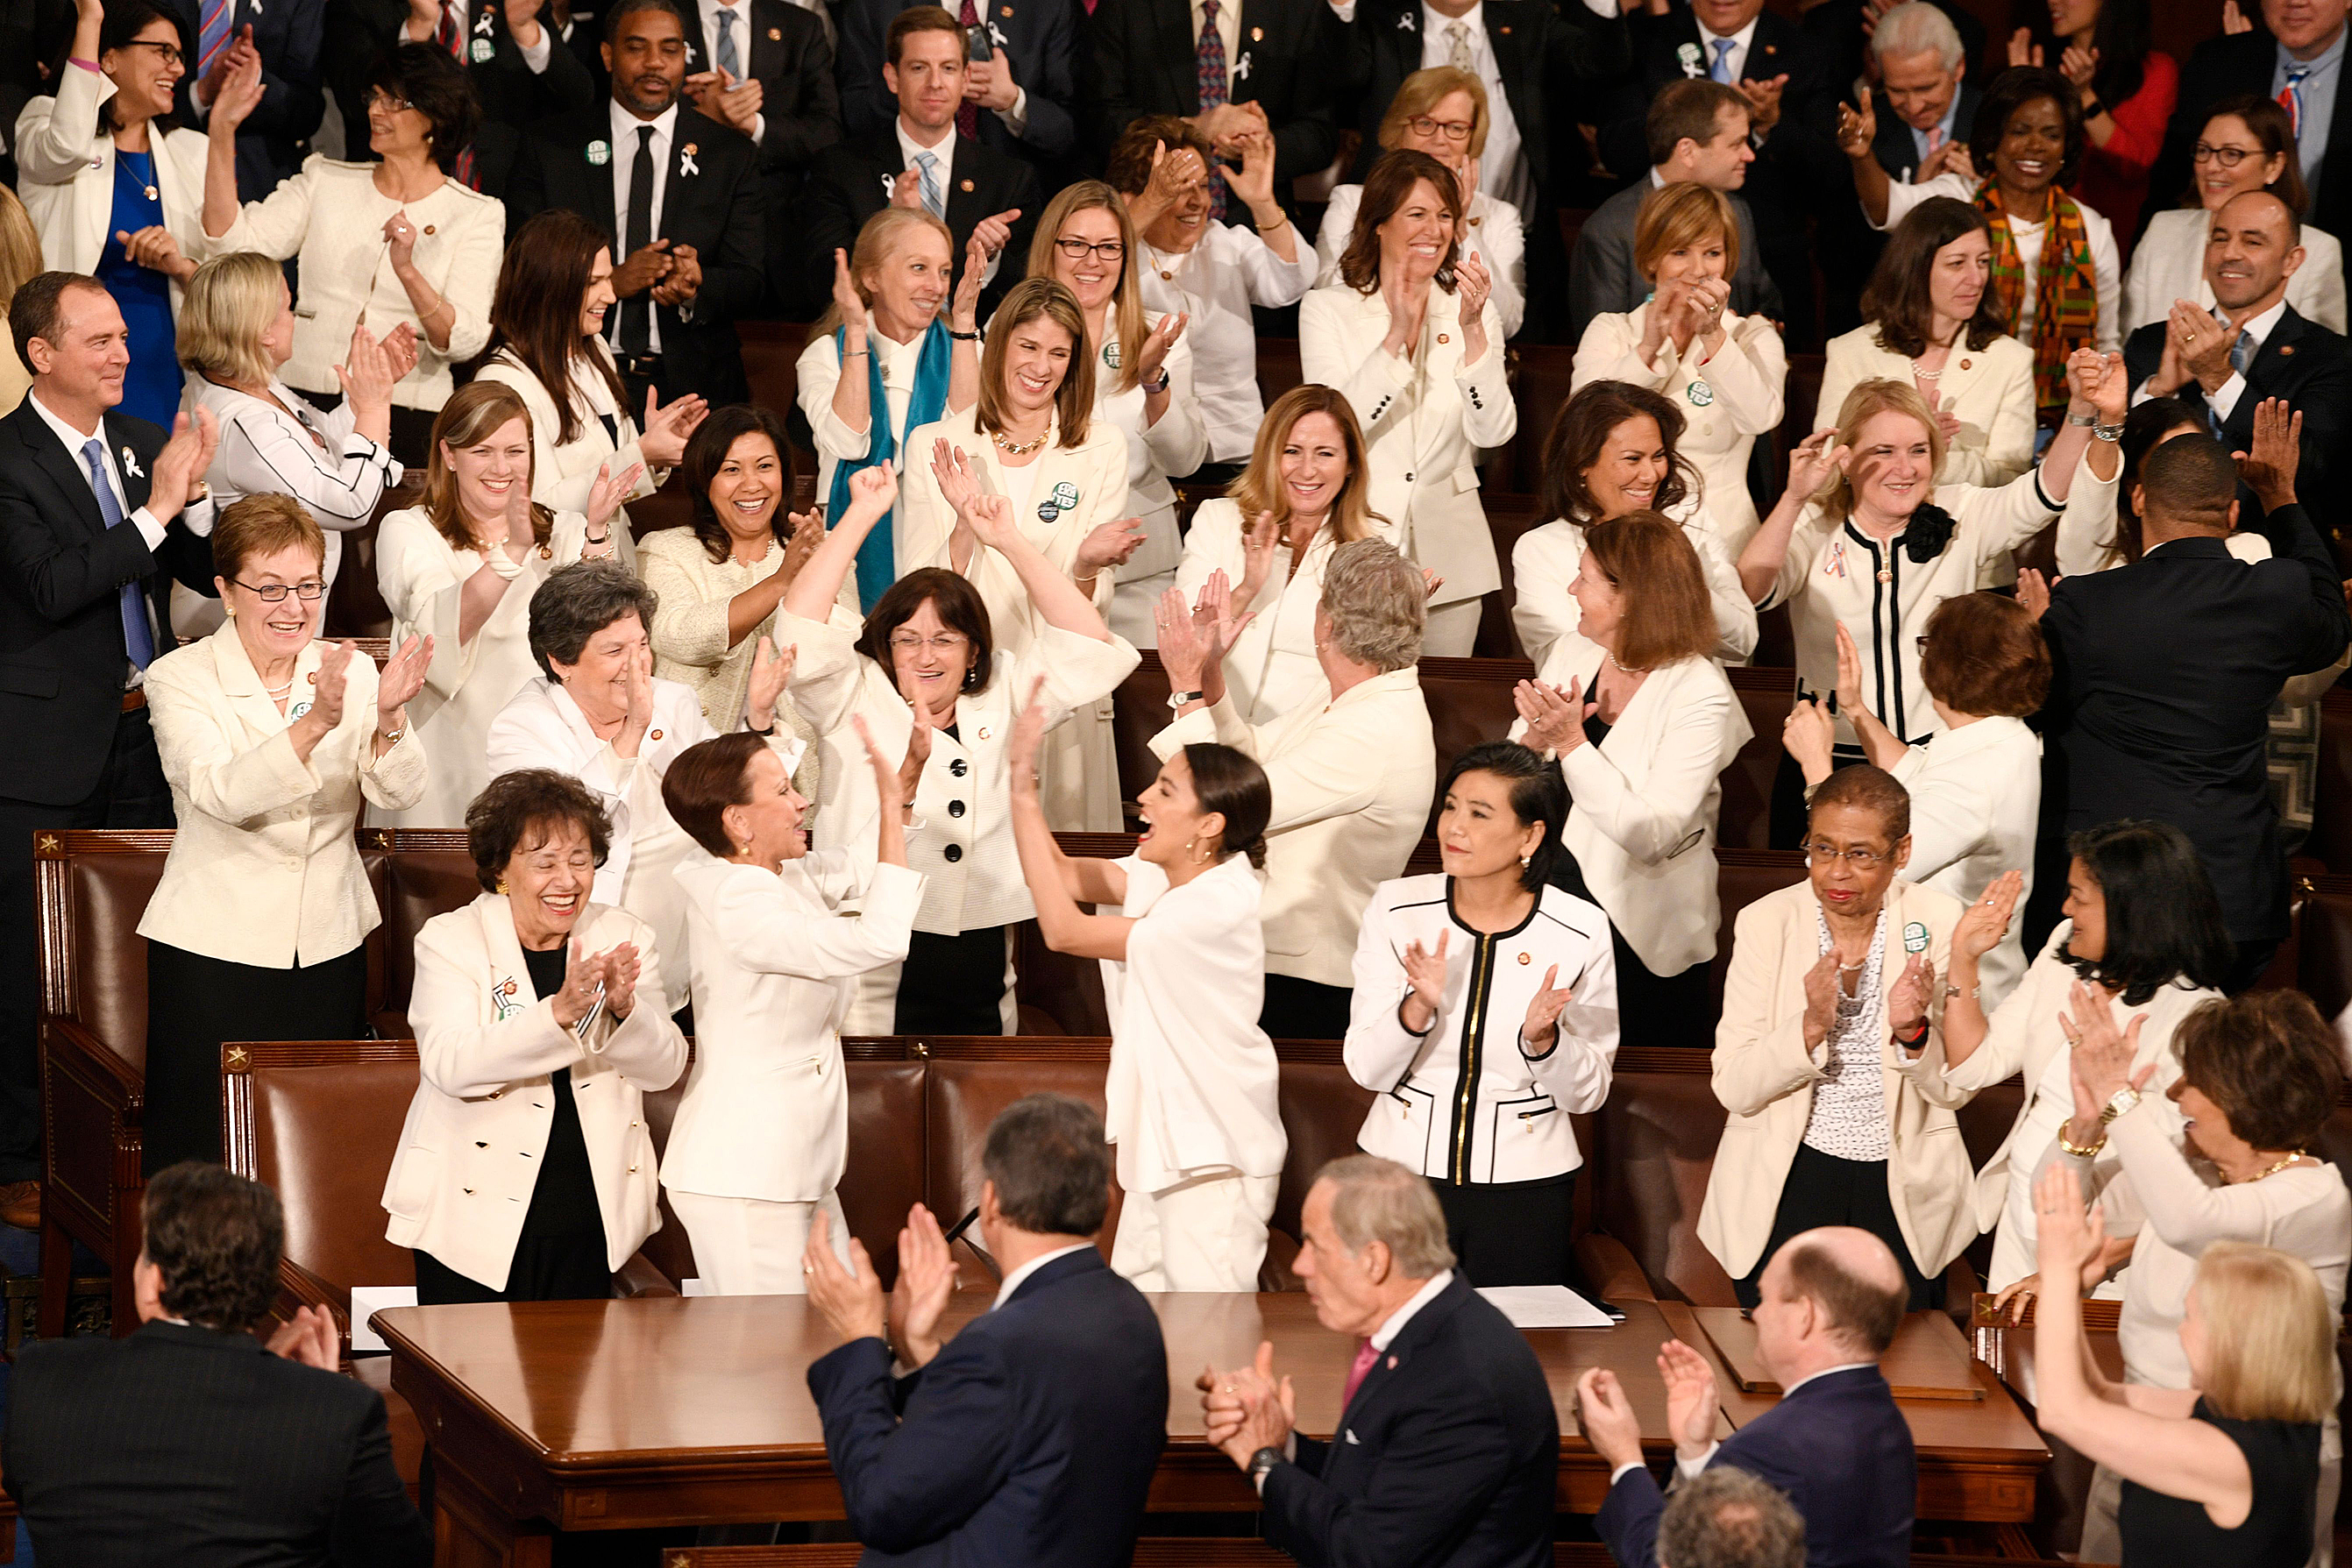 Congresswomen wearing white color meant to honor the women’s suffrage movement that led to the ratification of the 19th Amendment in 1920, are recognized by President Donald Trump as he delivers the State of the Union address, Washington, February 5, 2019.